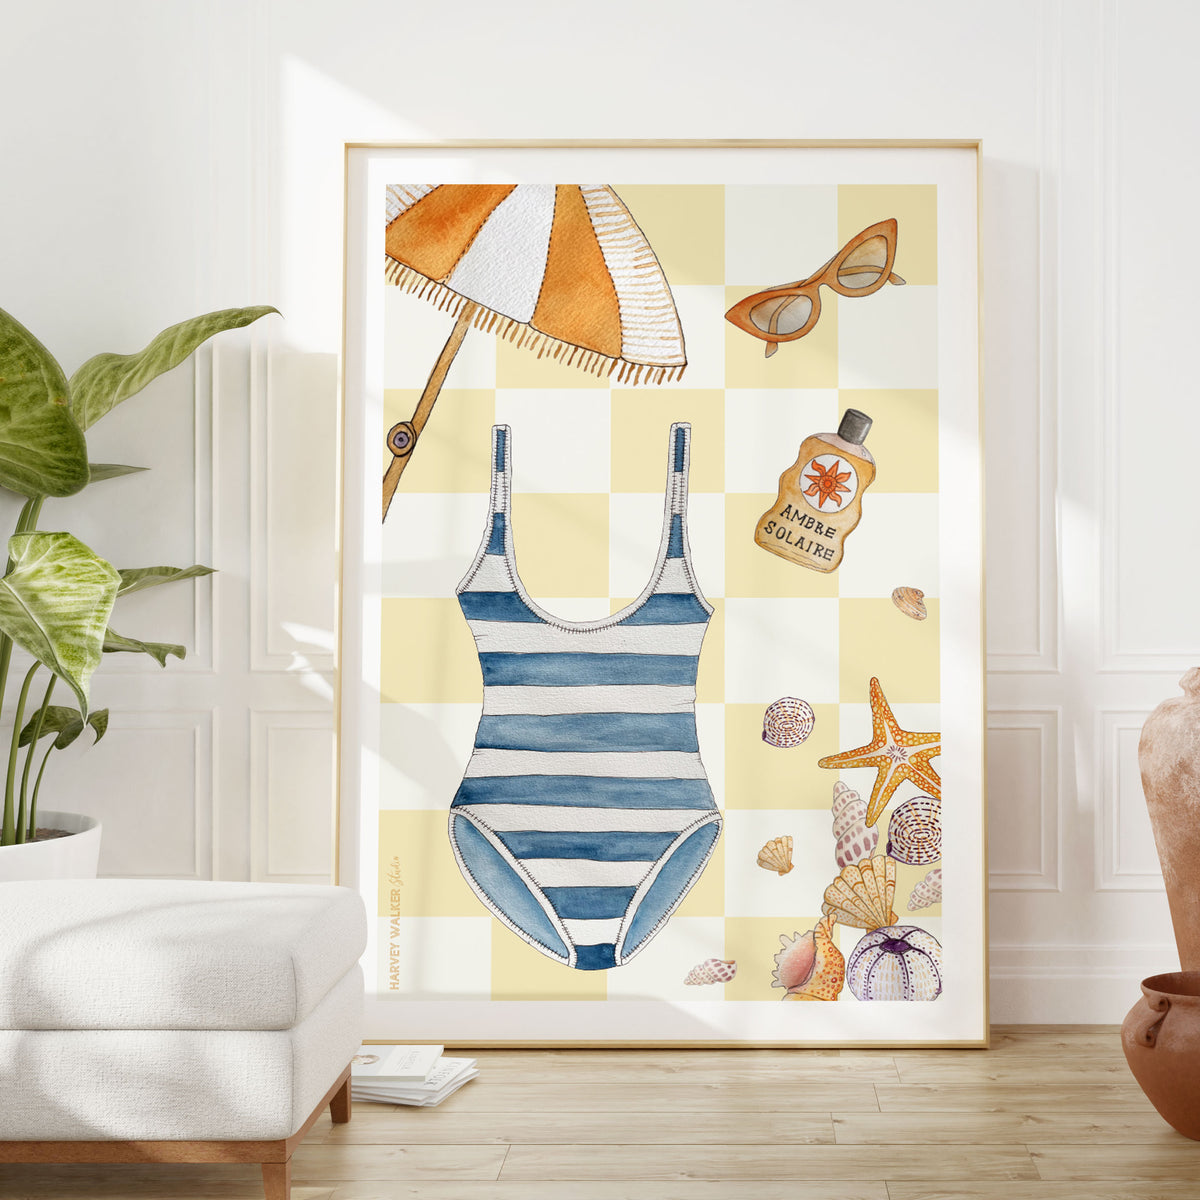 Modern mid century coastal print of yellow and white check print. With umbrellas, swimsuits and shells this print is perfect for giving you a feeling of being on holiday every day. Lovingly hand illustrated and great for house warming presents.